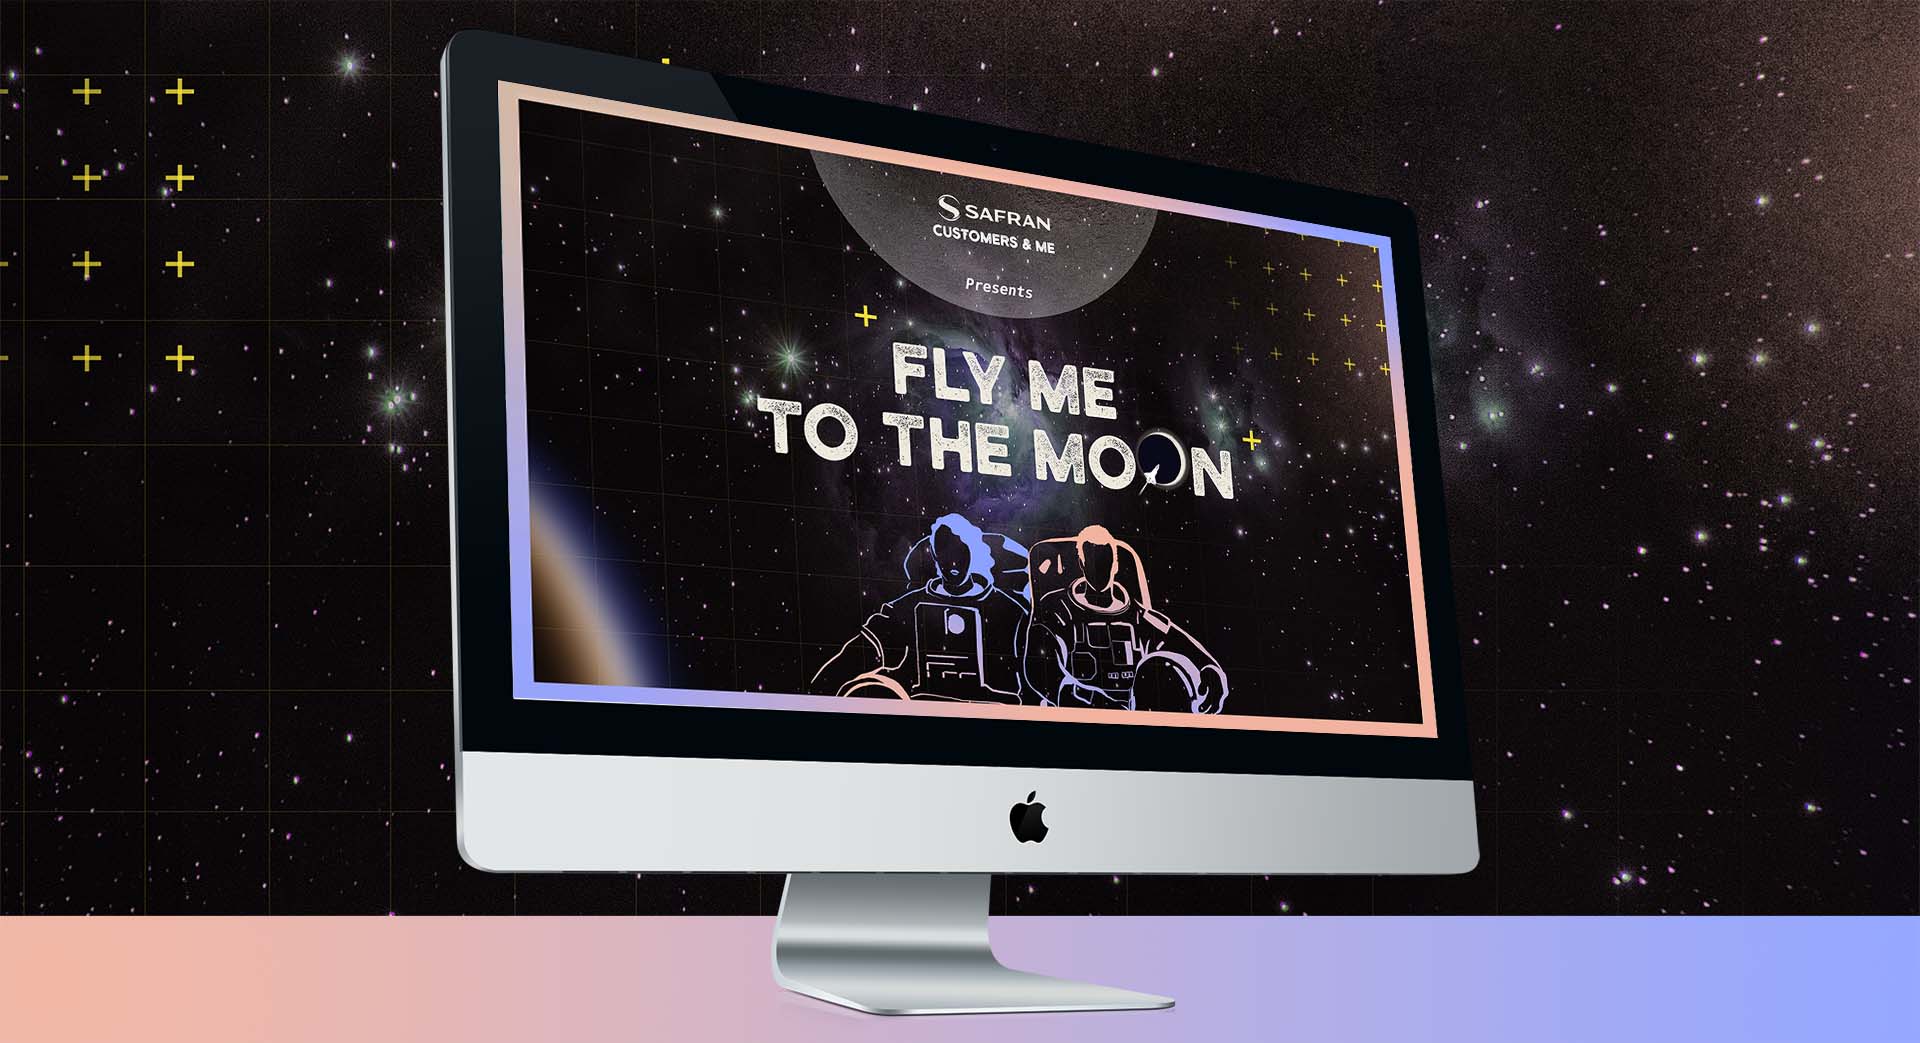 adesias_communication_formation_learn_safran_seats_customer_me_fly_me_to_the_moon